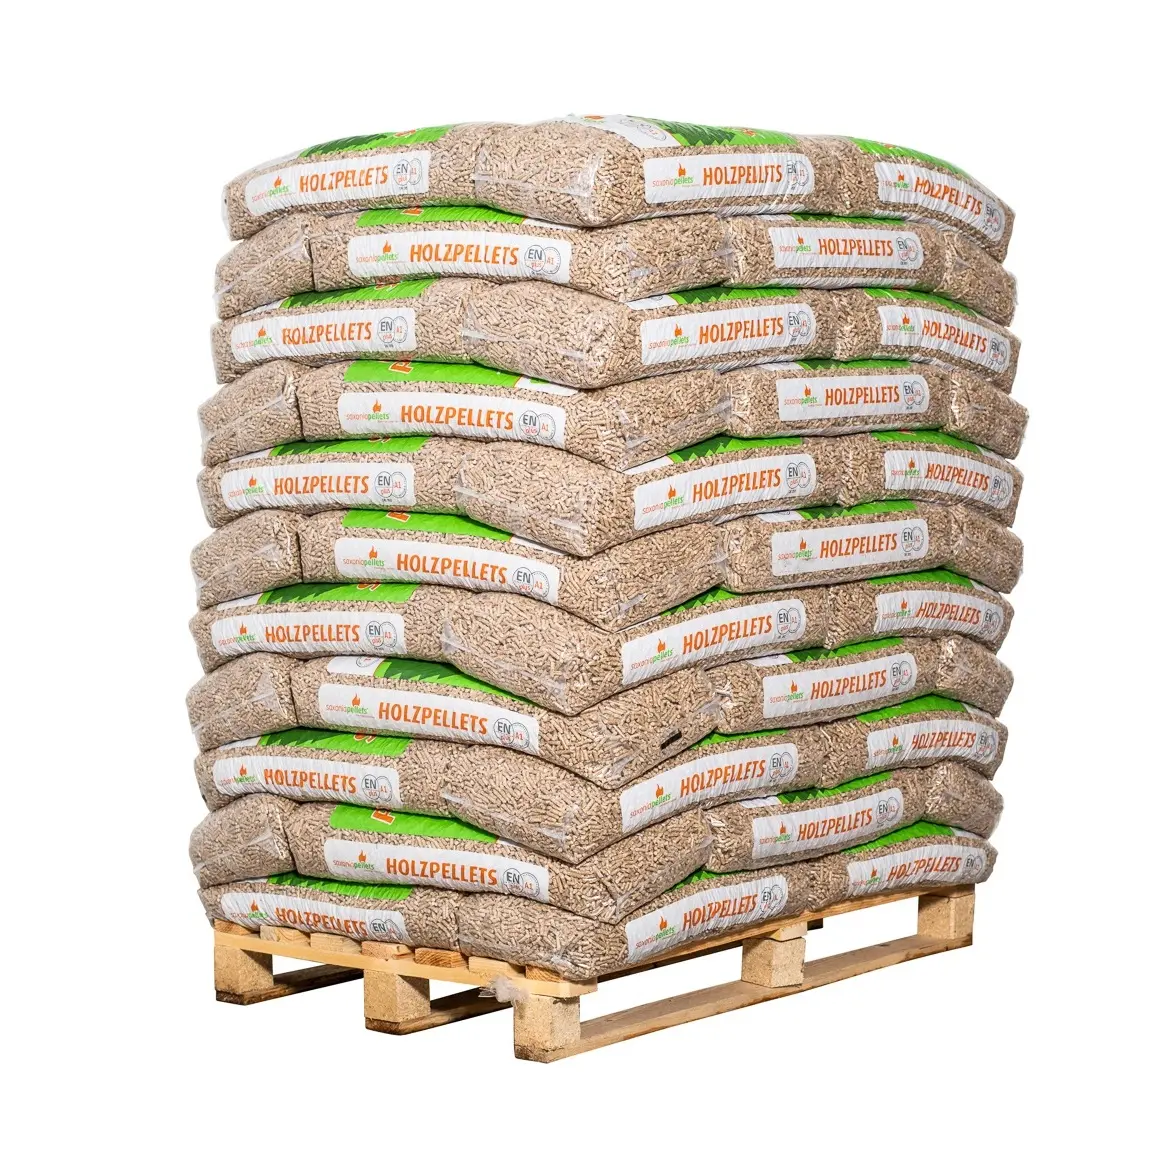 Wholesale Price Supplier of Pine & Fir Wood Pellets 6mm (Wood Pellets in 15kg Bags) Bulk Stock With Fast Shipping